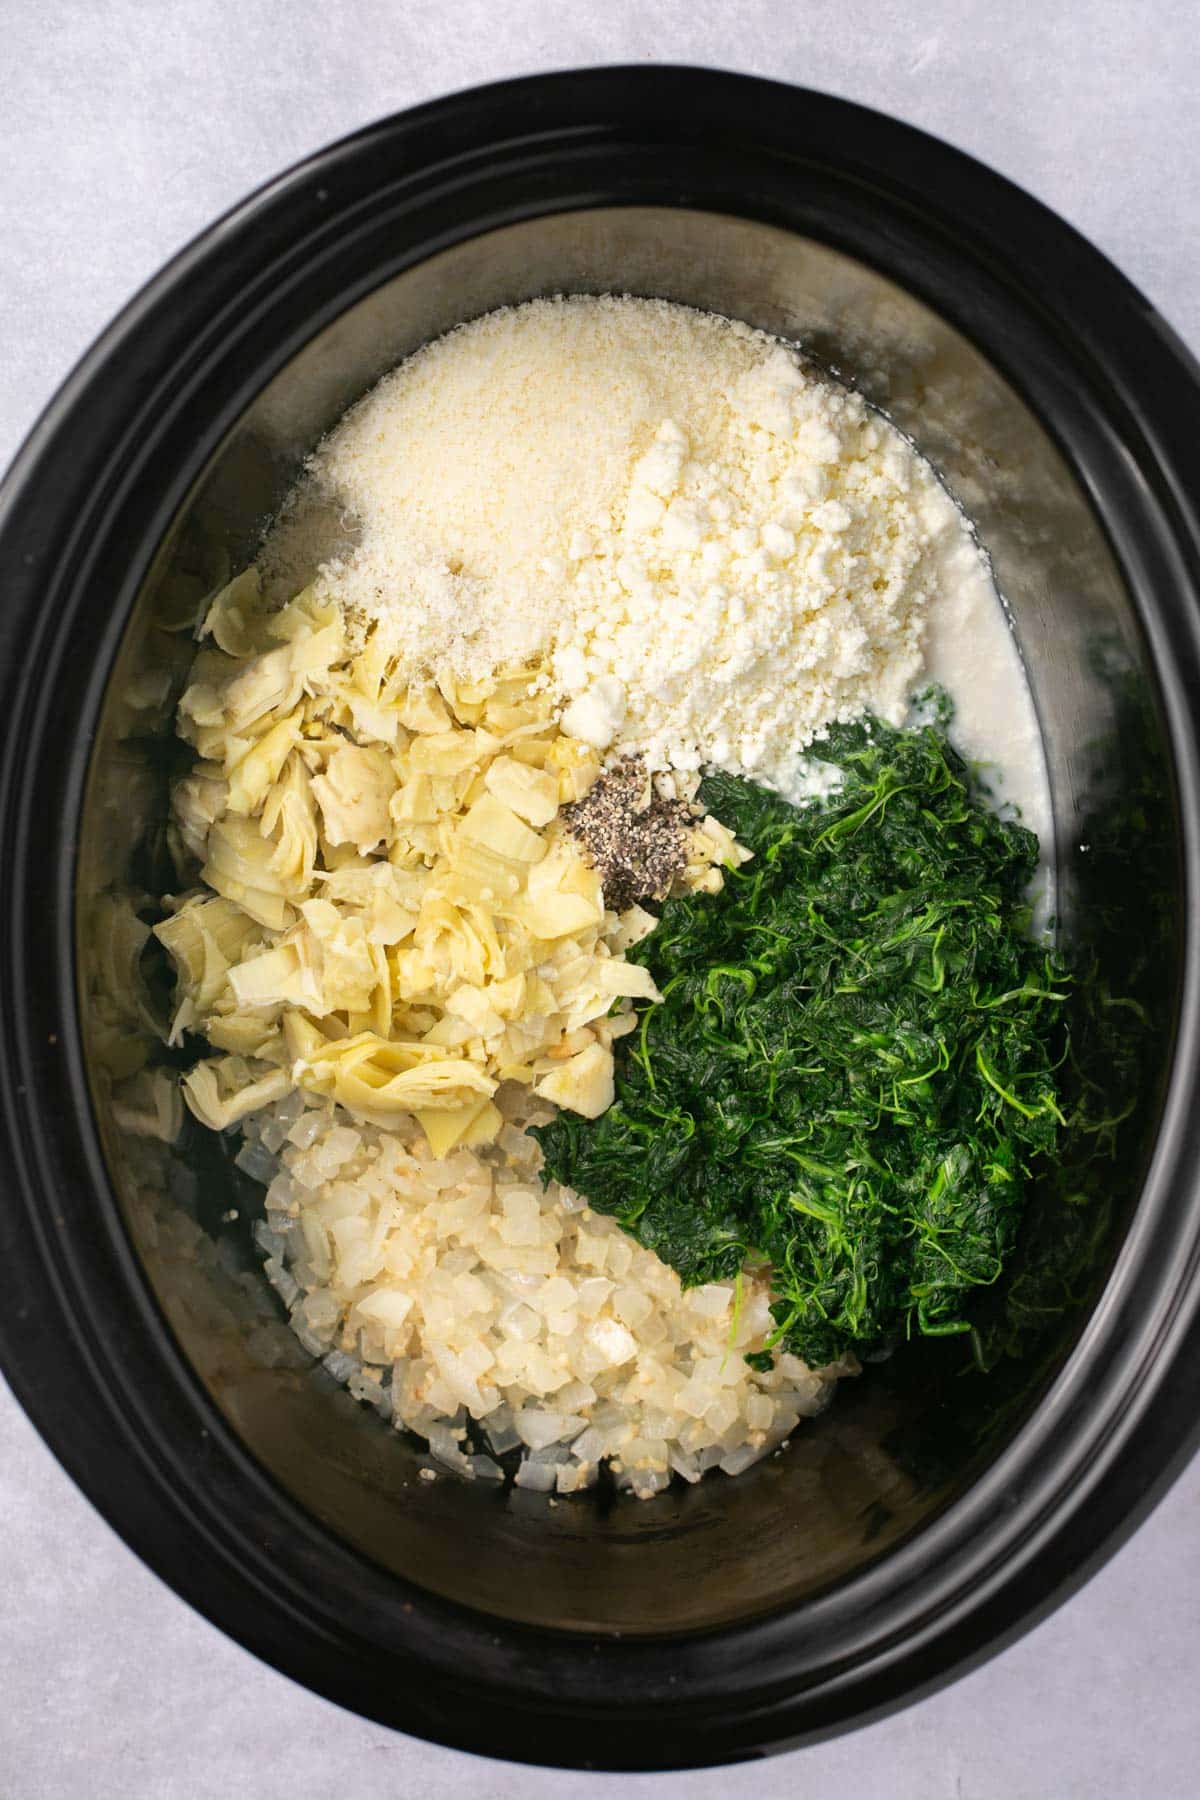 Ingredients for spinach artichoke dip added to a slow cooker.